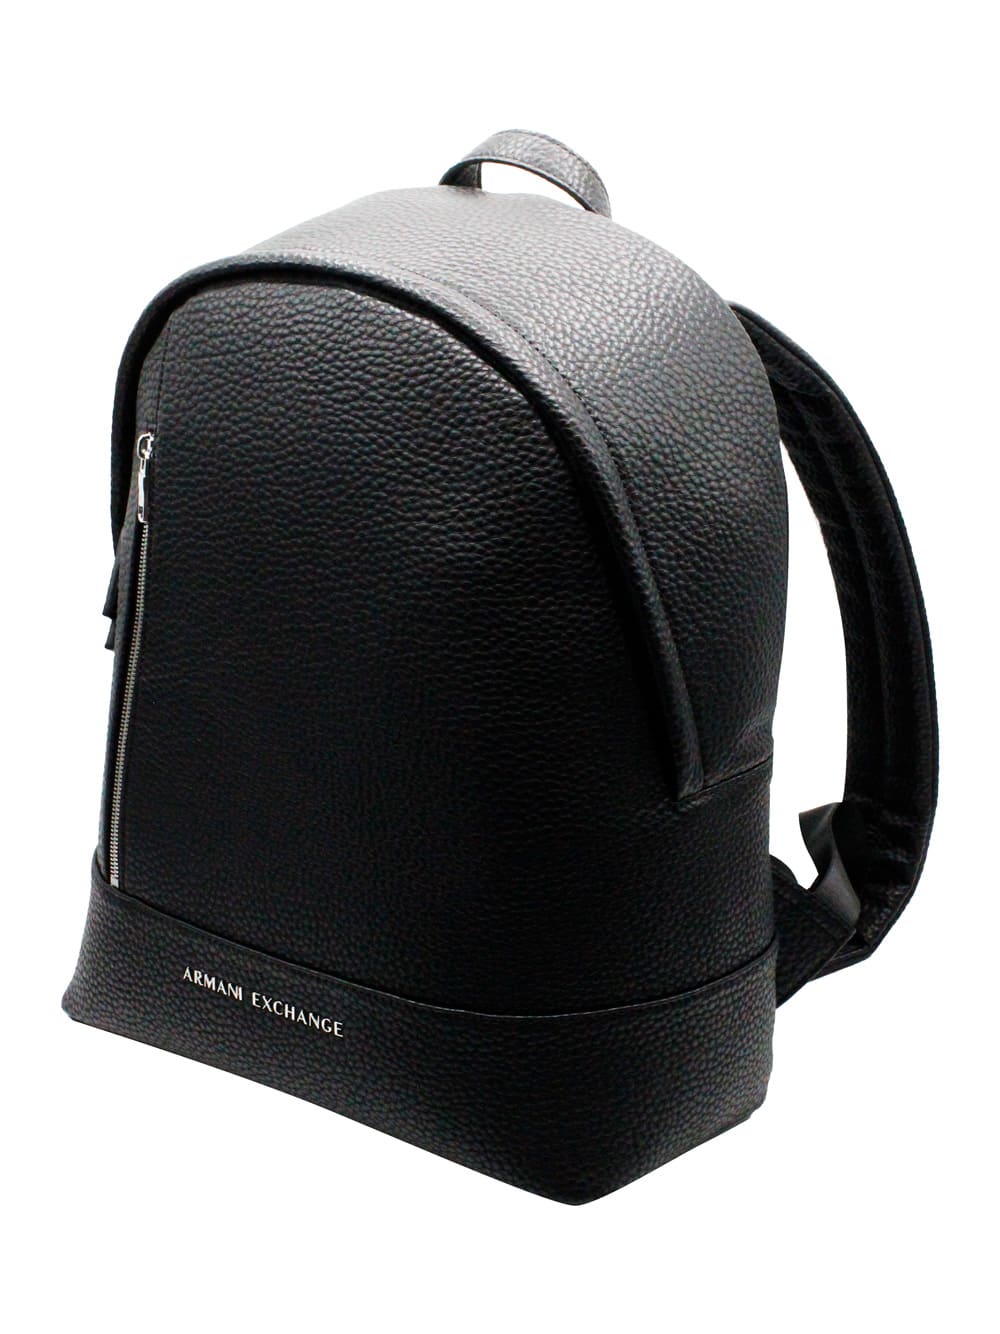 Backpack In Very Soft Soft Grain Eco-leather With Logo On The Front. Adjustable Shoulder Straps. Measures 38x32x12 Cm